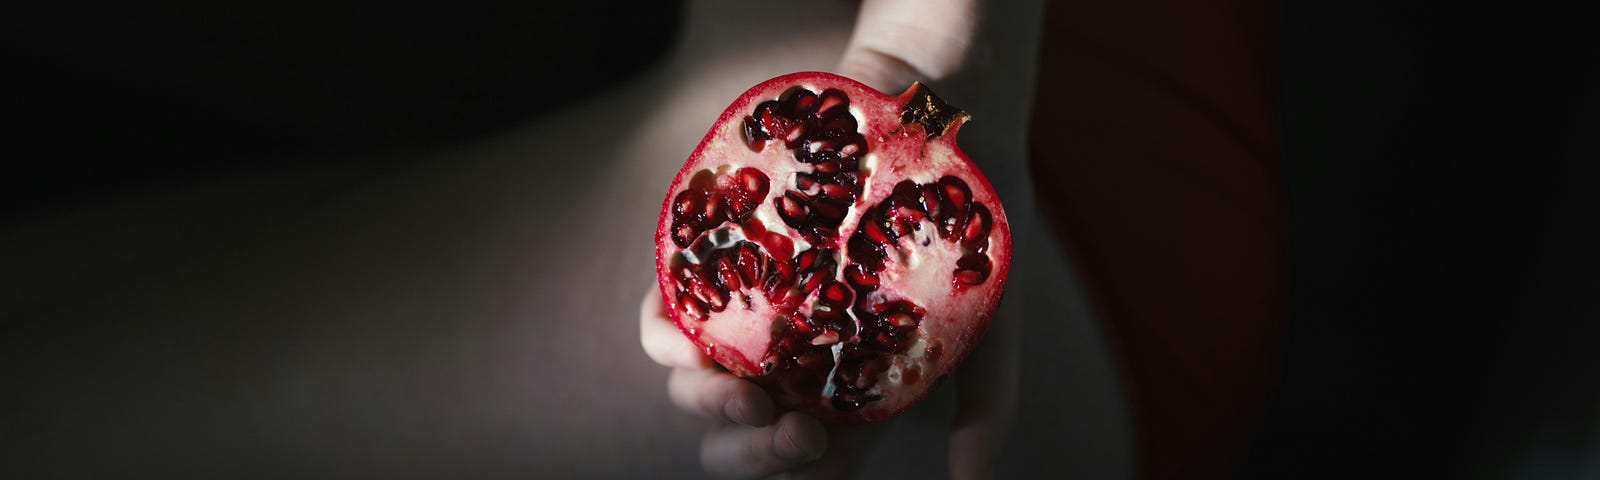 A split pomegranate, seeds glistening crimson, is in the foreground, held in a woman’s hand. The background is mysteriously out-of-fous, but shows a suggestion of a pale-skinned woman’s upper thigh and outline of red lingerie.